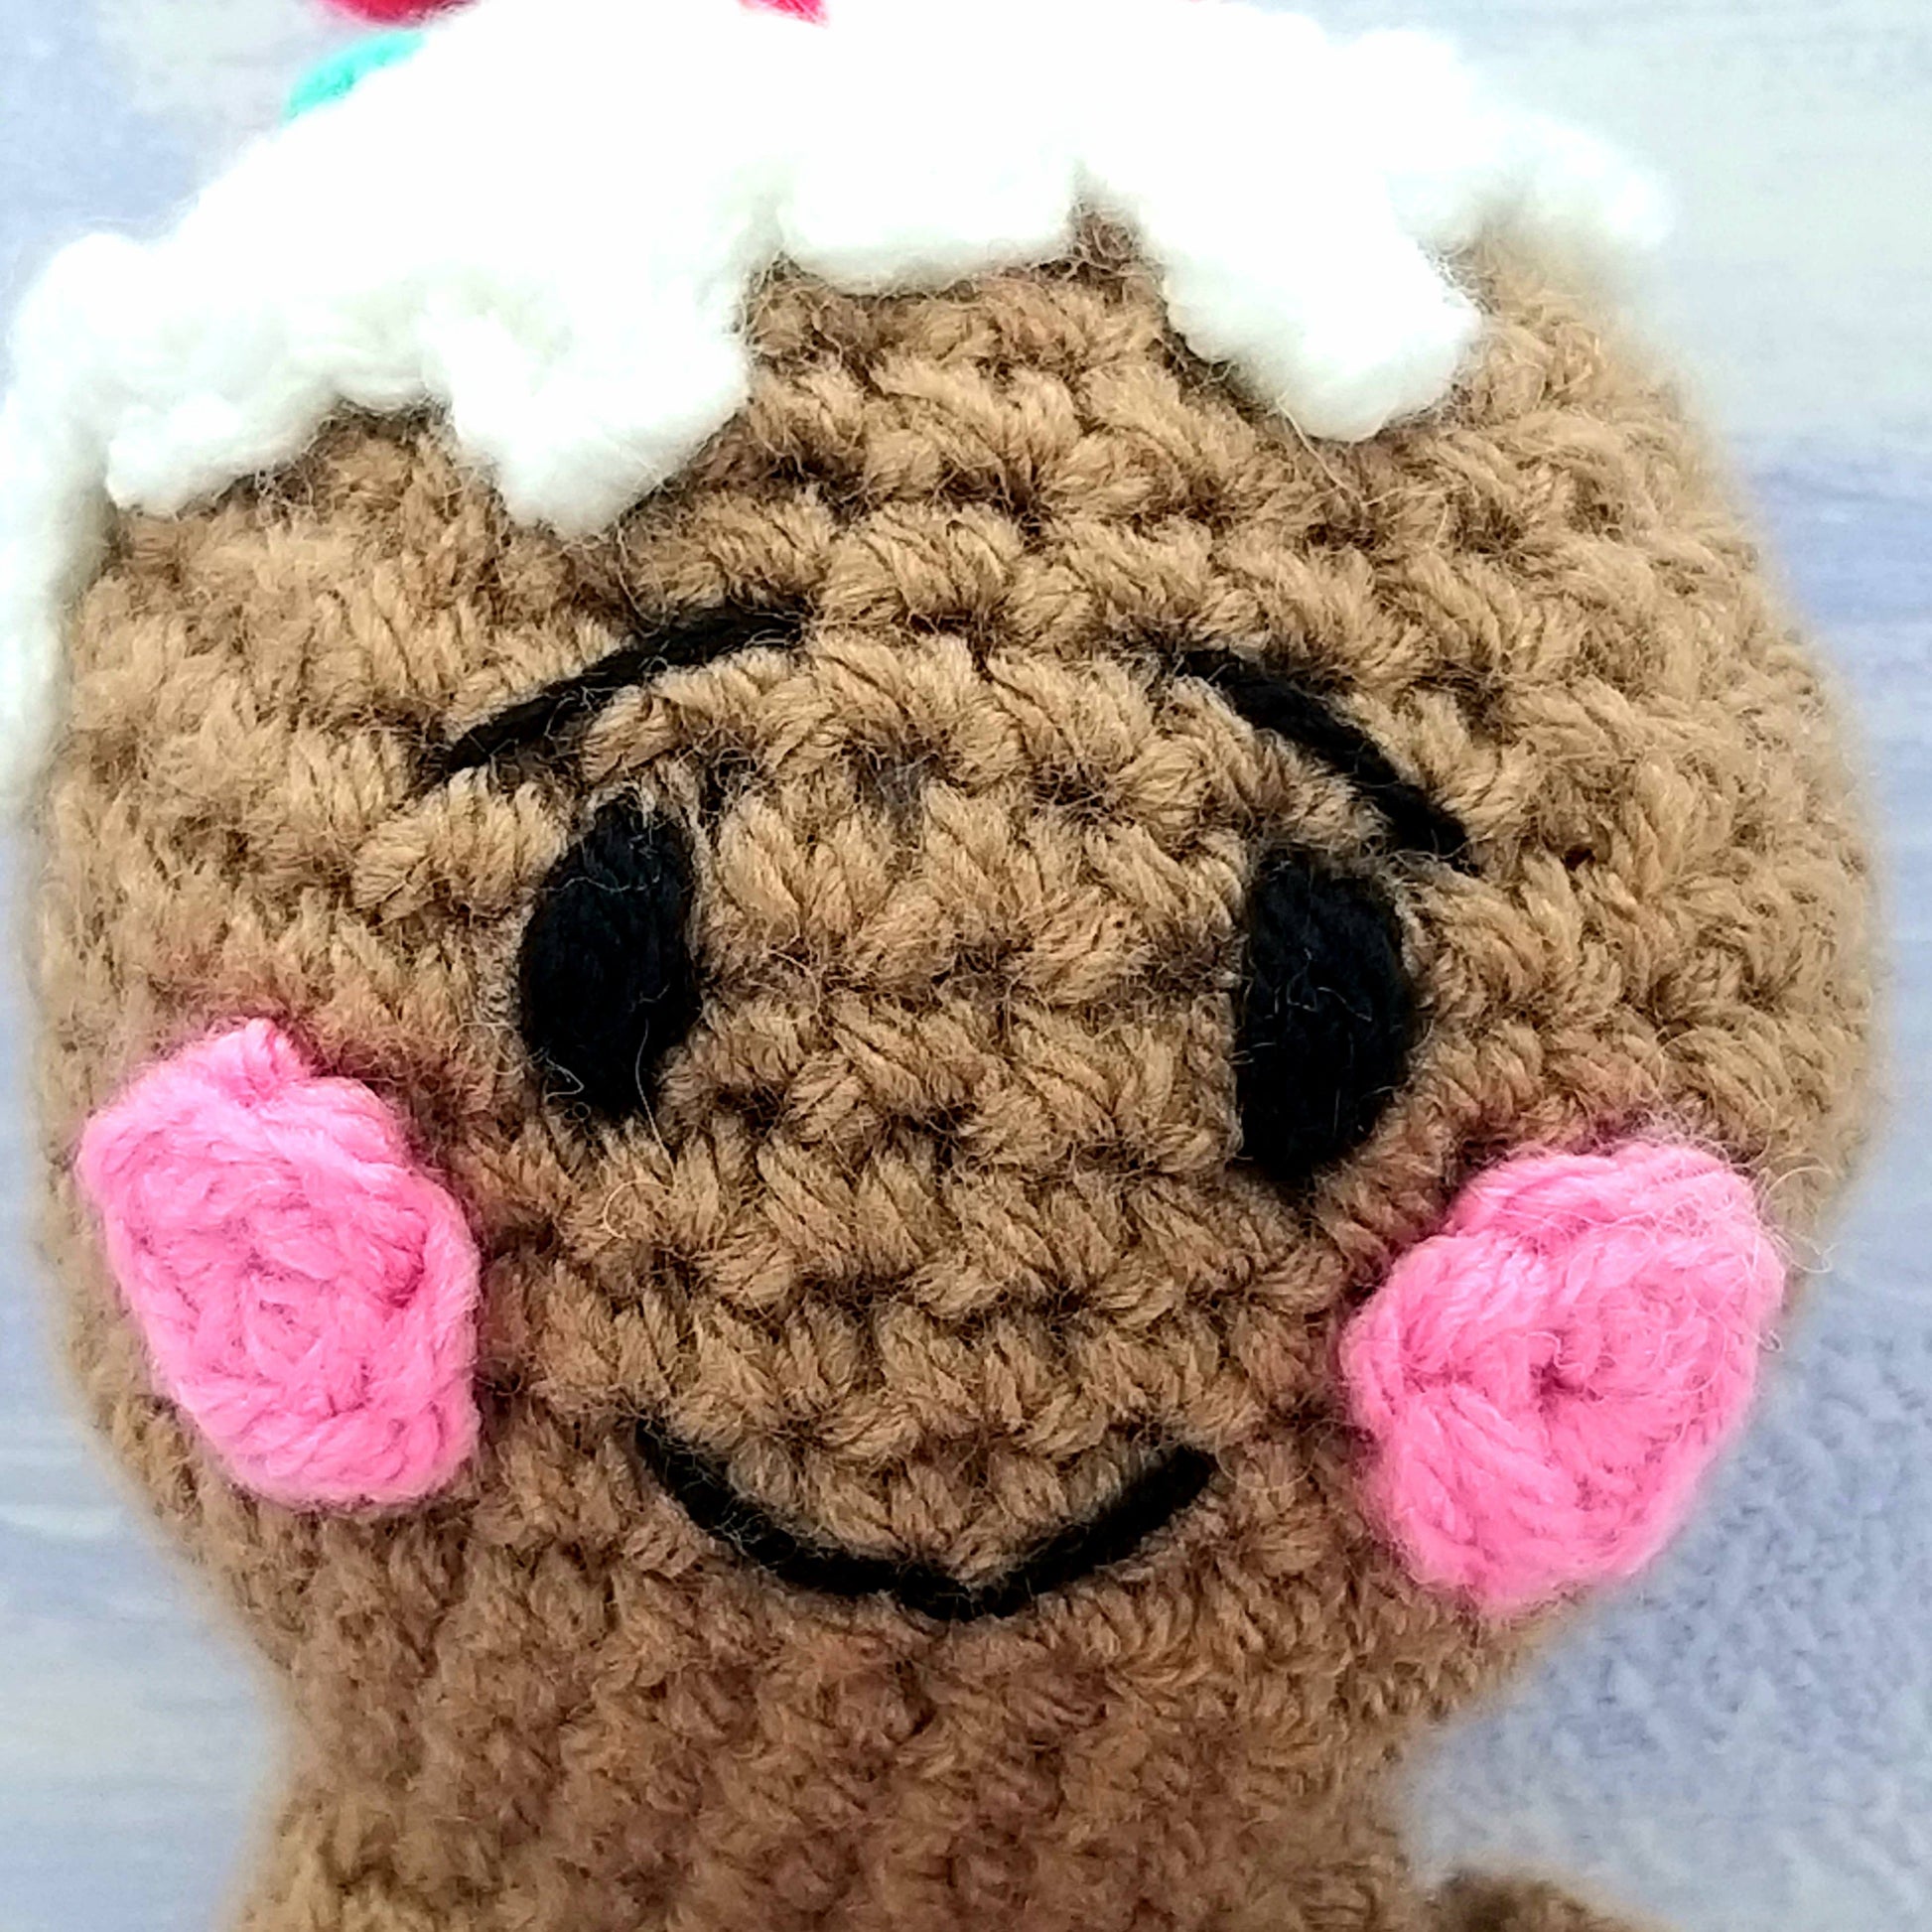 Close up of stitches on crochet gingerbread man's face